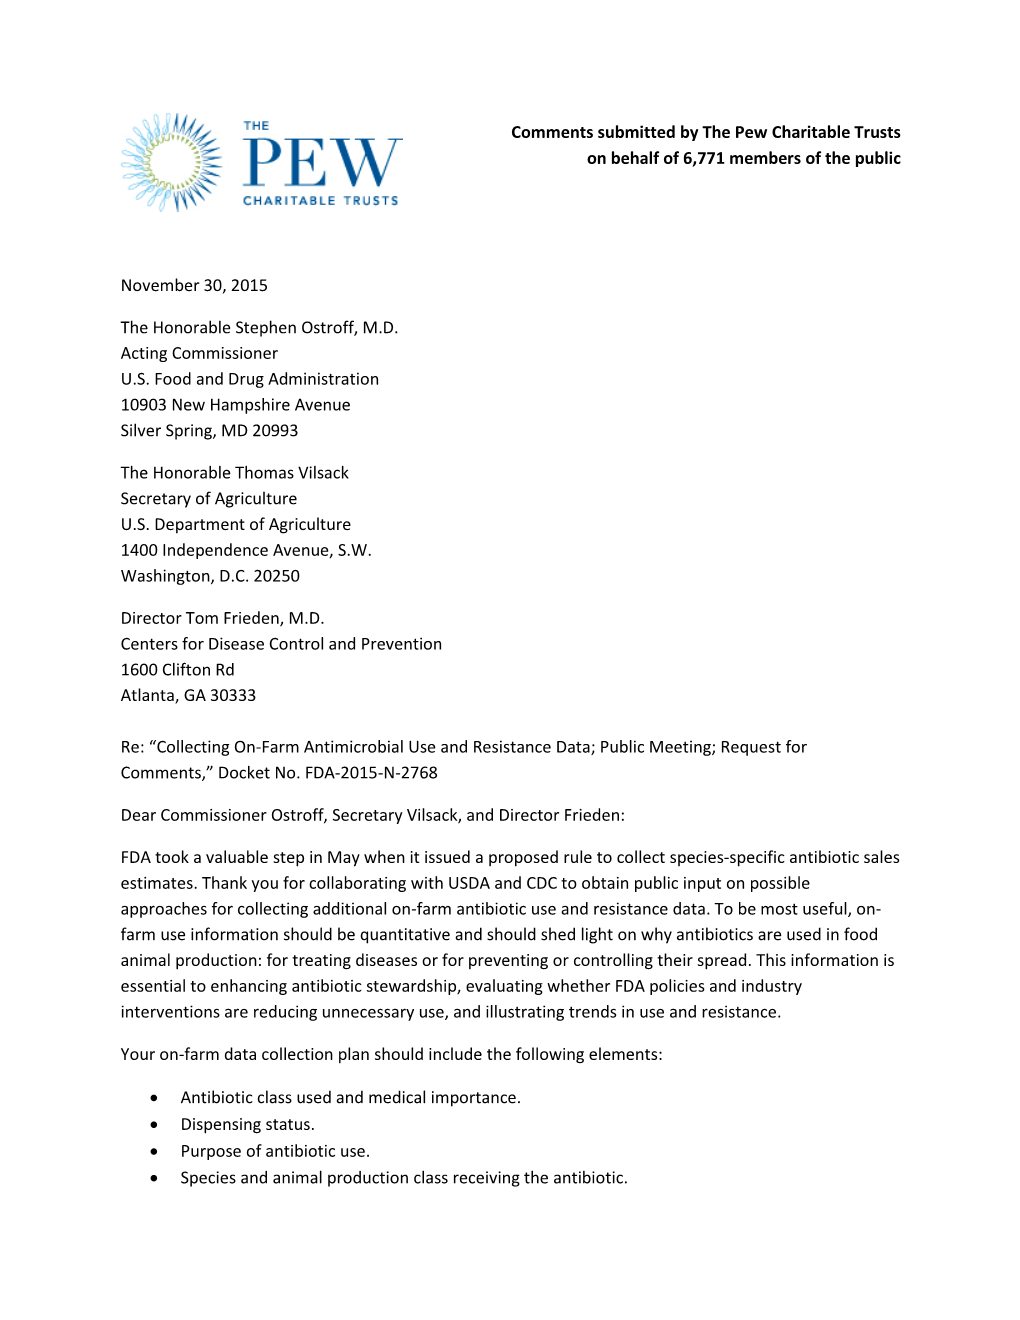 Comments Submitted by the Pew Charitable Trusts on Behalf of 6,771 Members of the Public